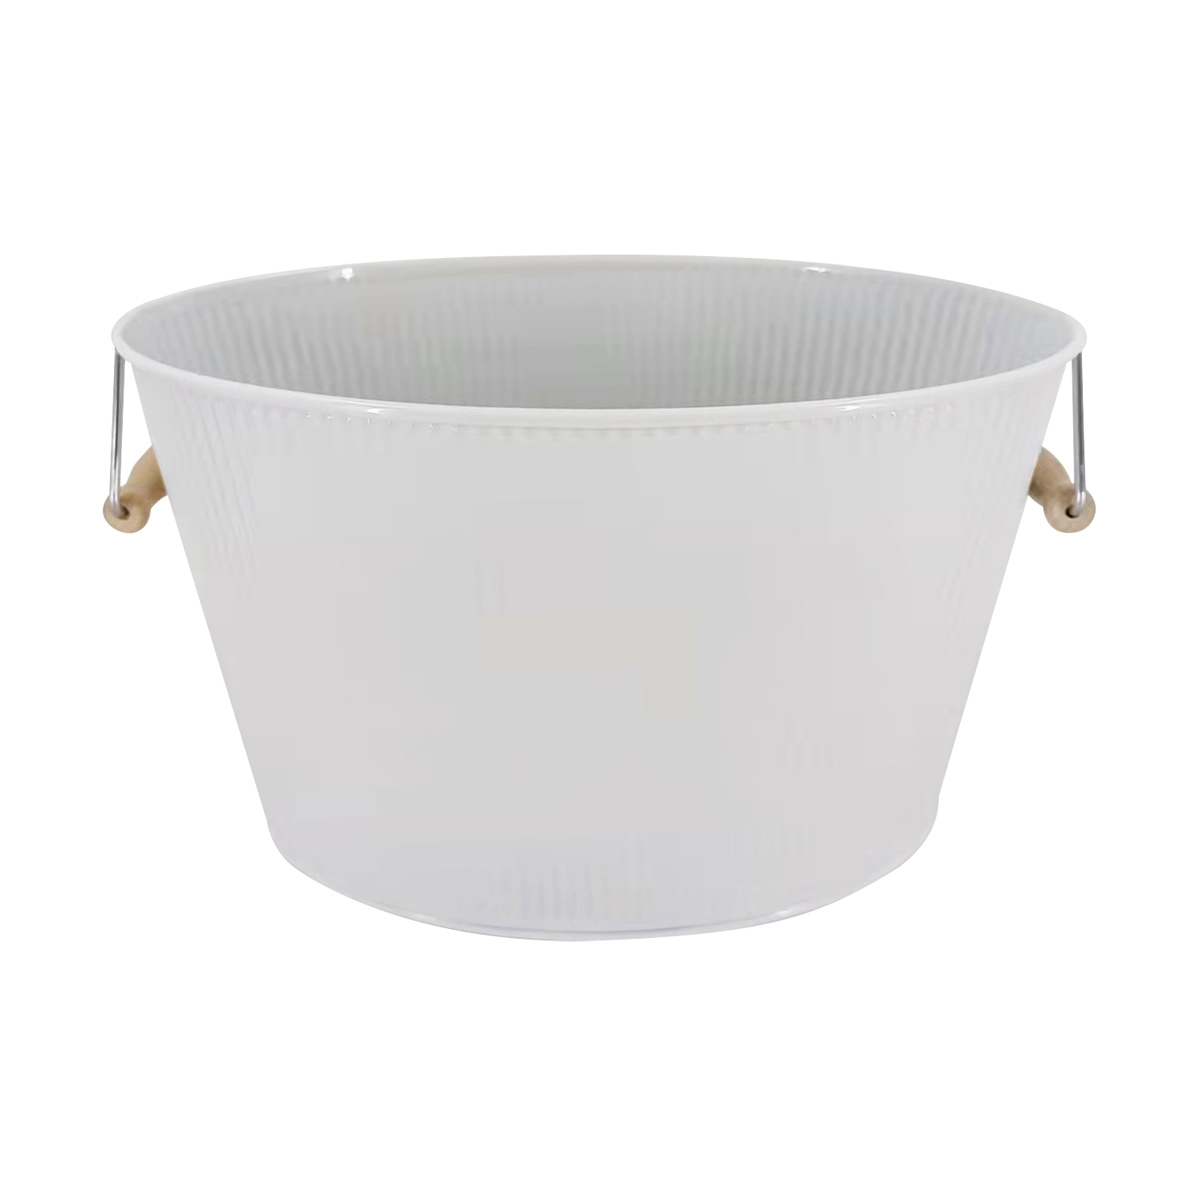 White Oval Textured Metal Bin with Handles, Large